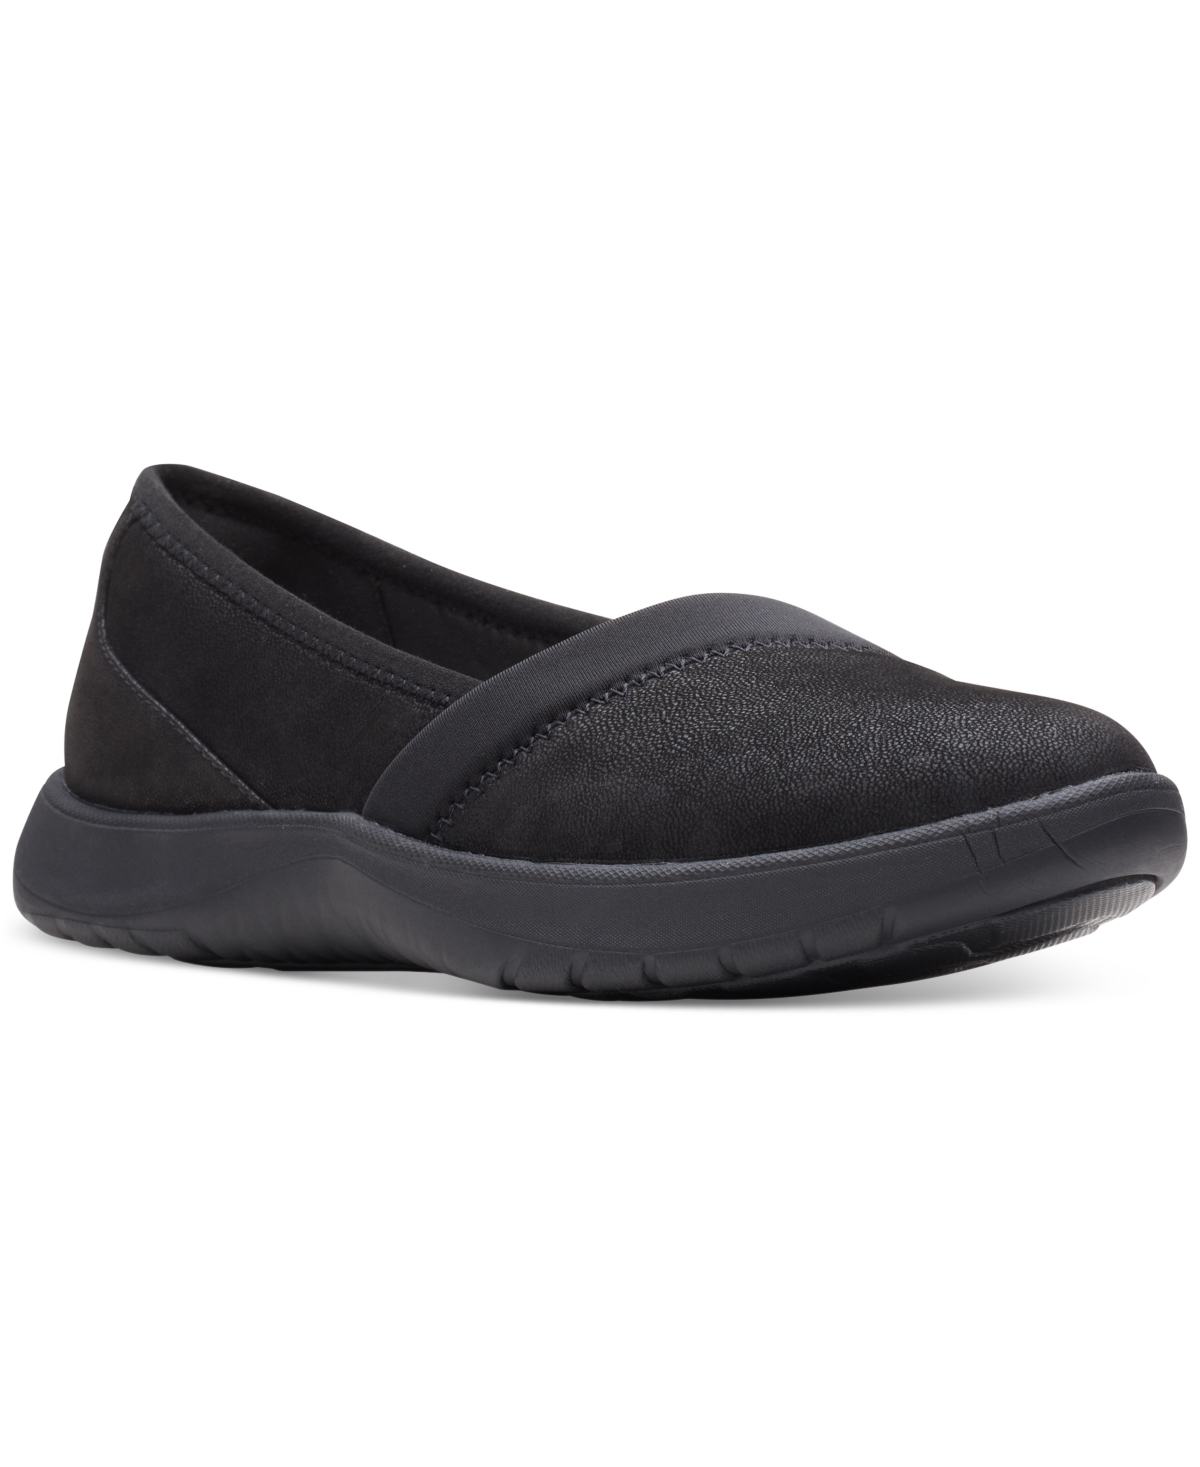 Women's Adella Pace Cloudsteppers - Black